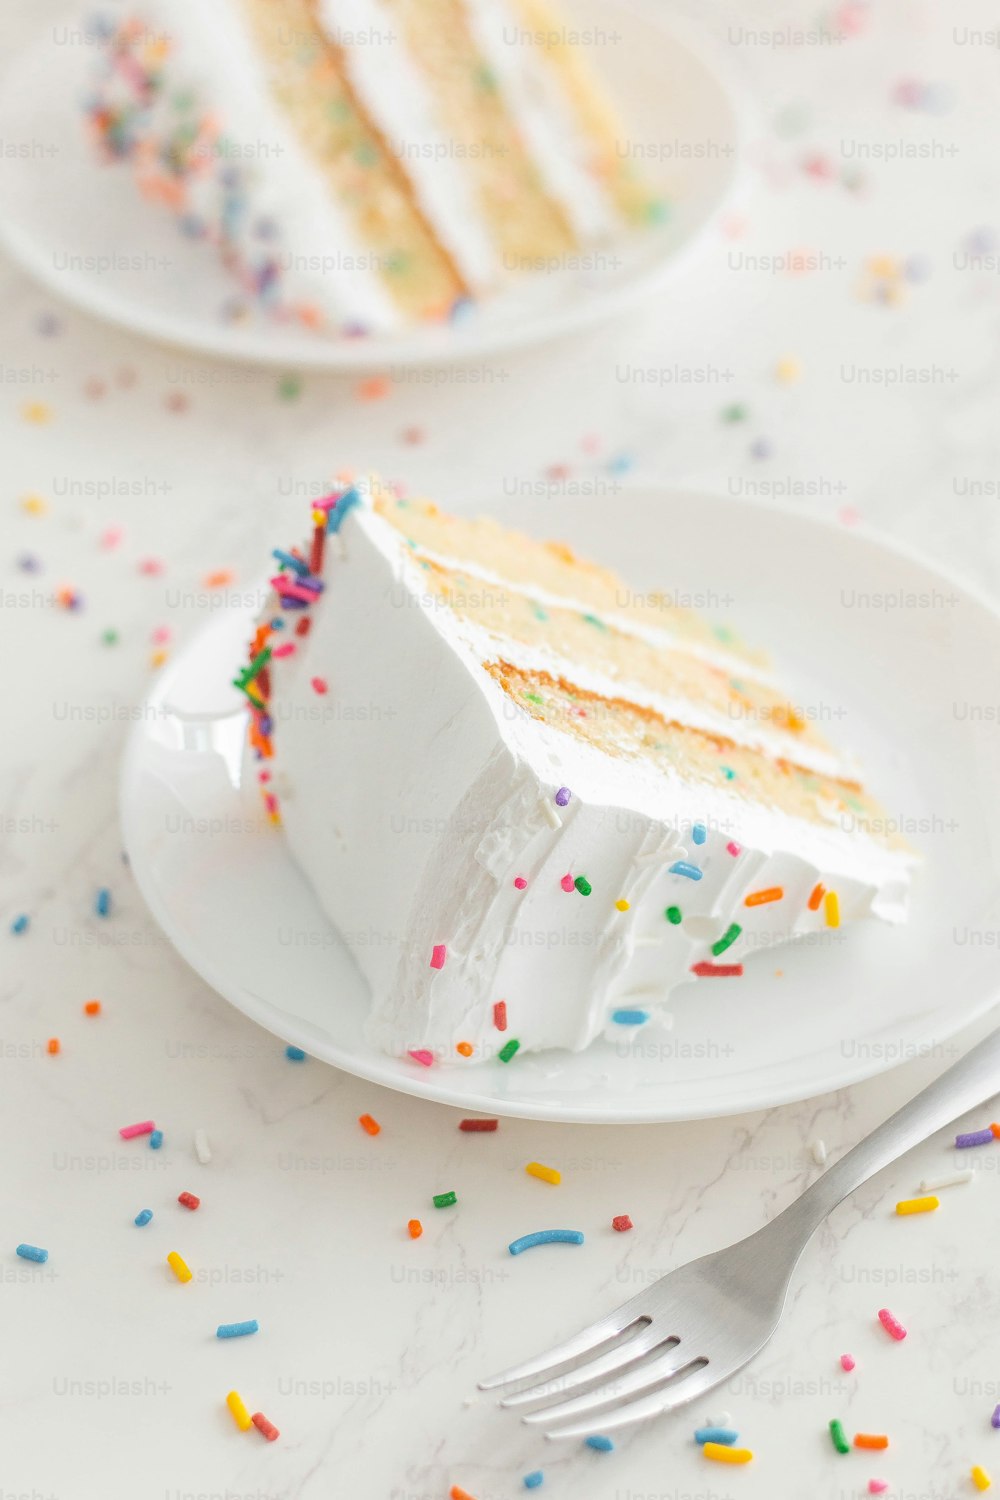 a slice of cake on a plate with a fork